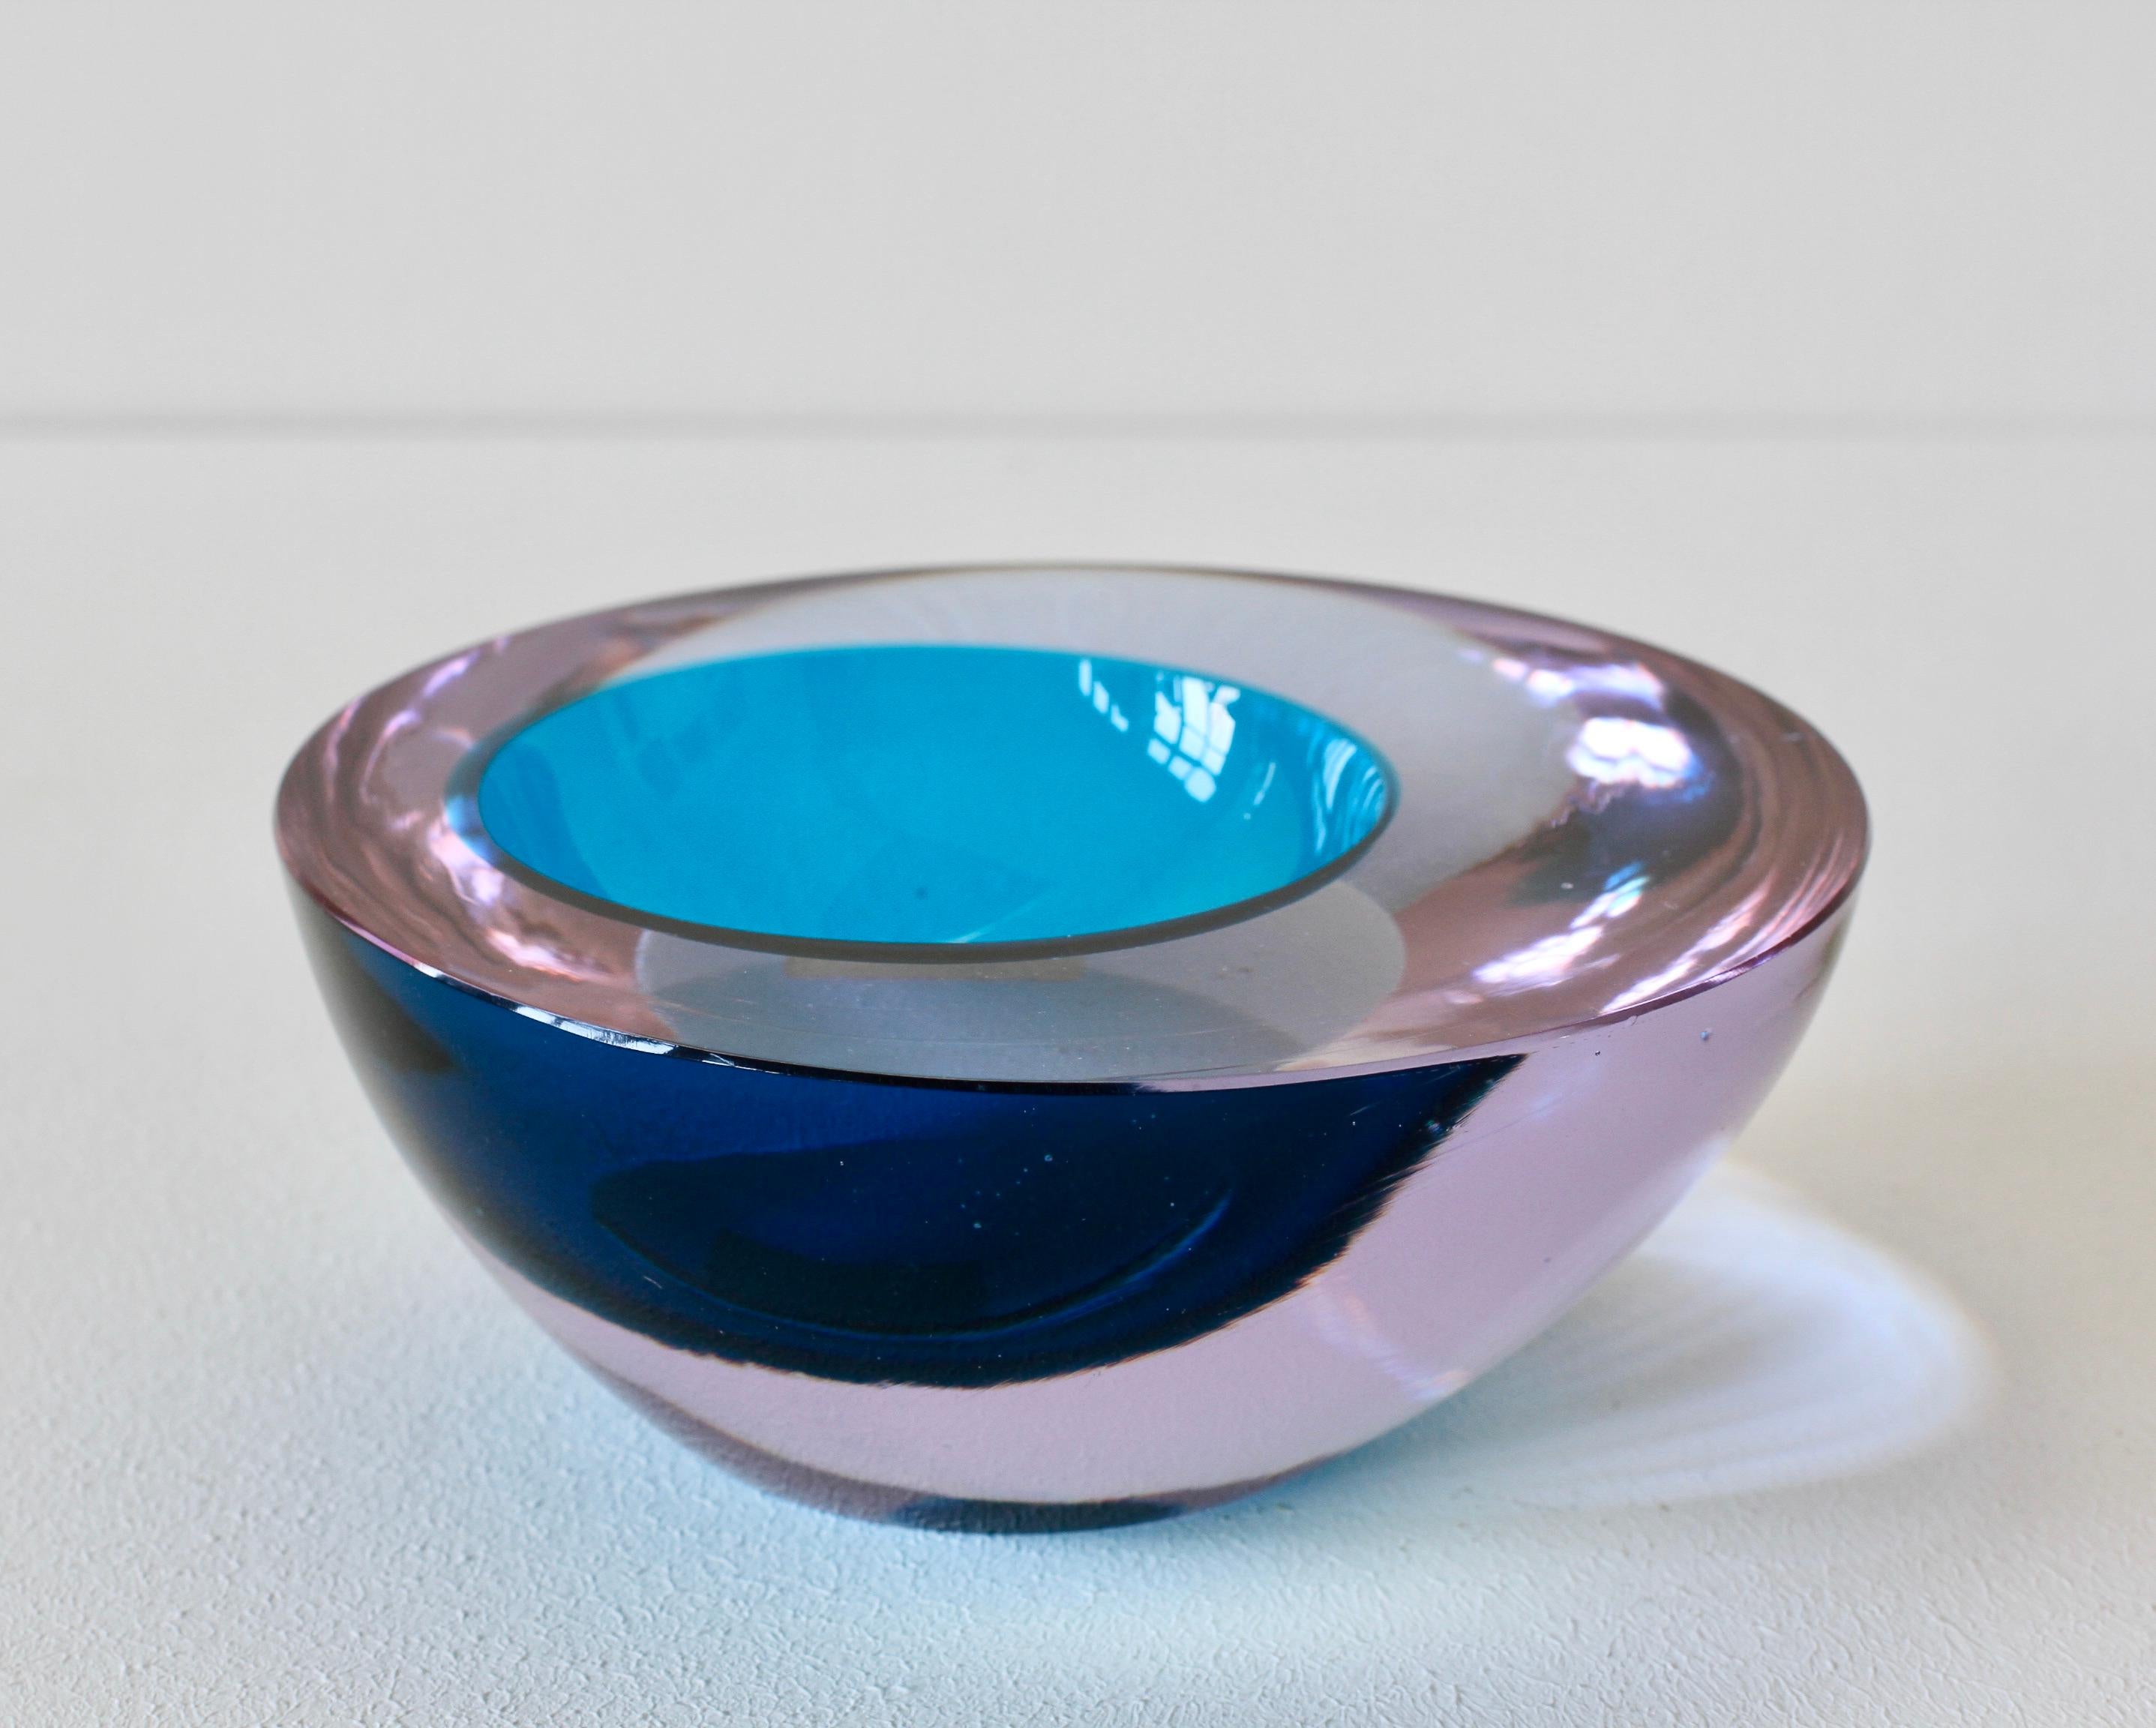 Large Italian Alexandrite and Blue Sommerso Murano Glass Bowl, Dish or Ashtray In Excellent Condition For Sale In Landau an der Isar, Bayern